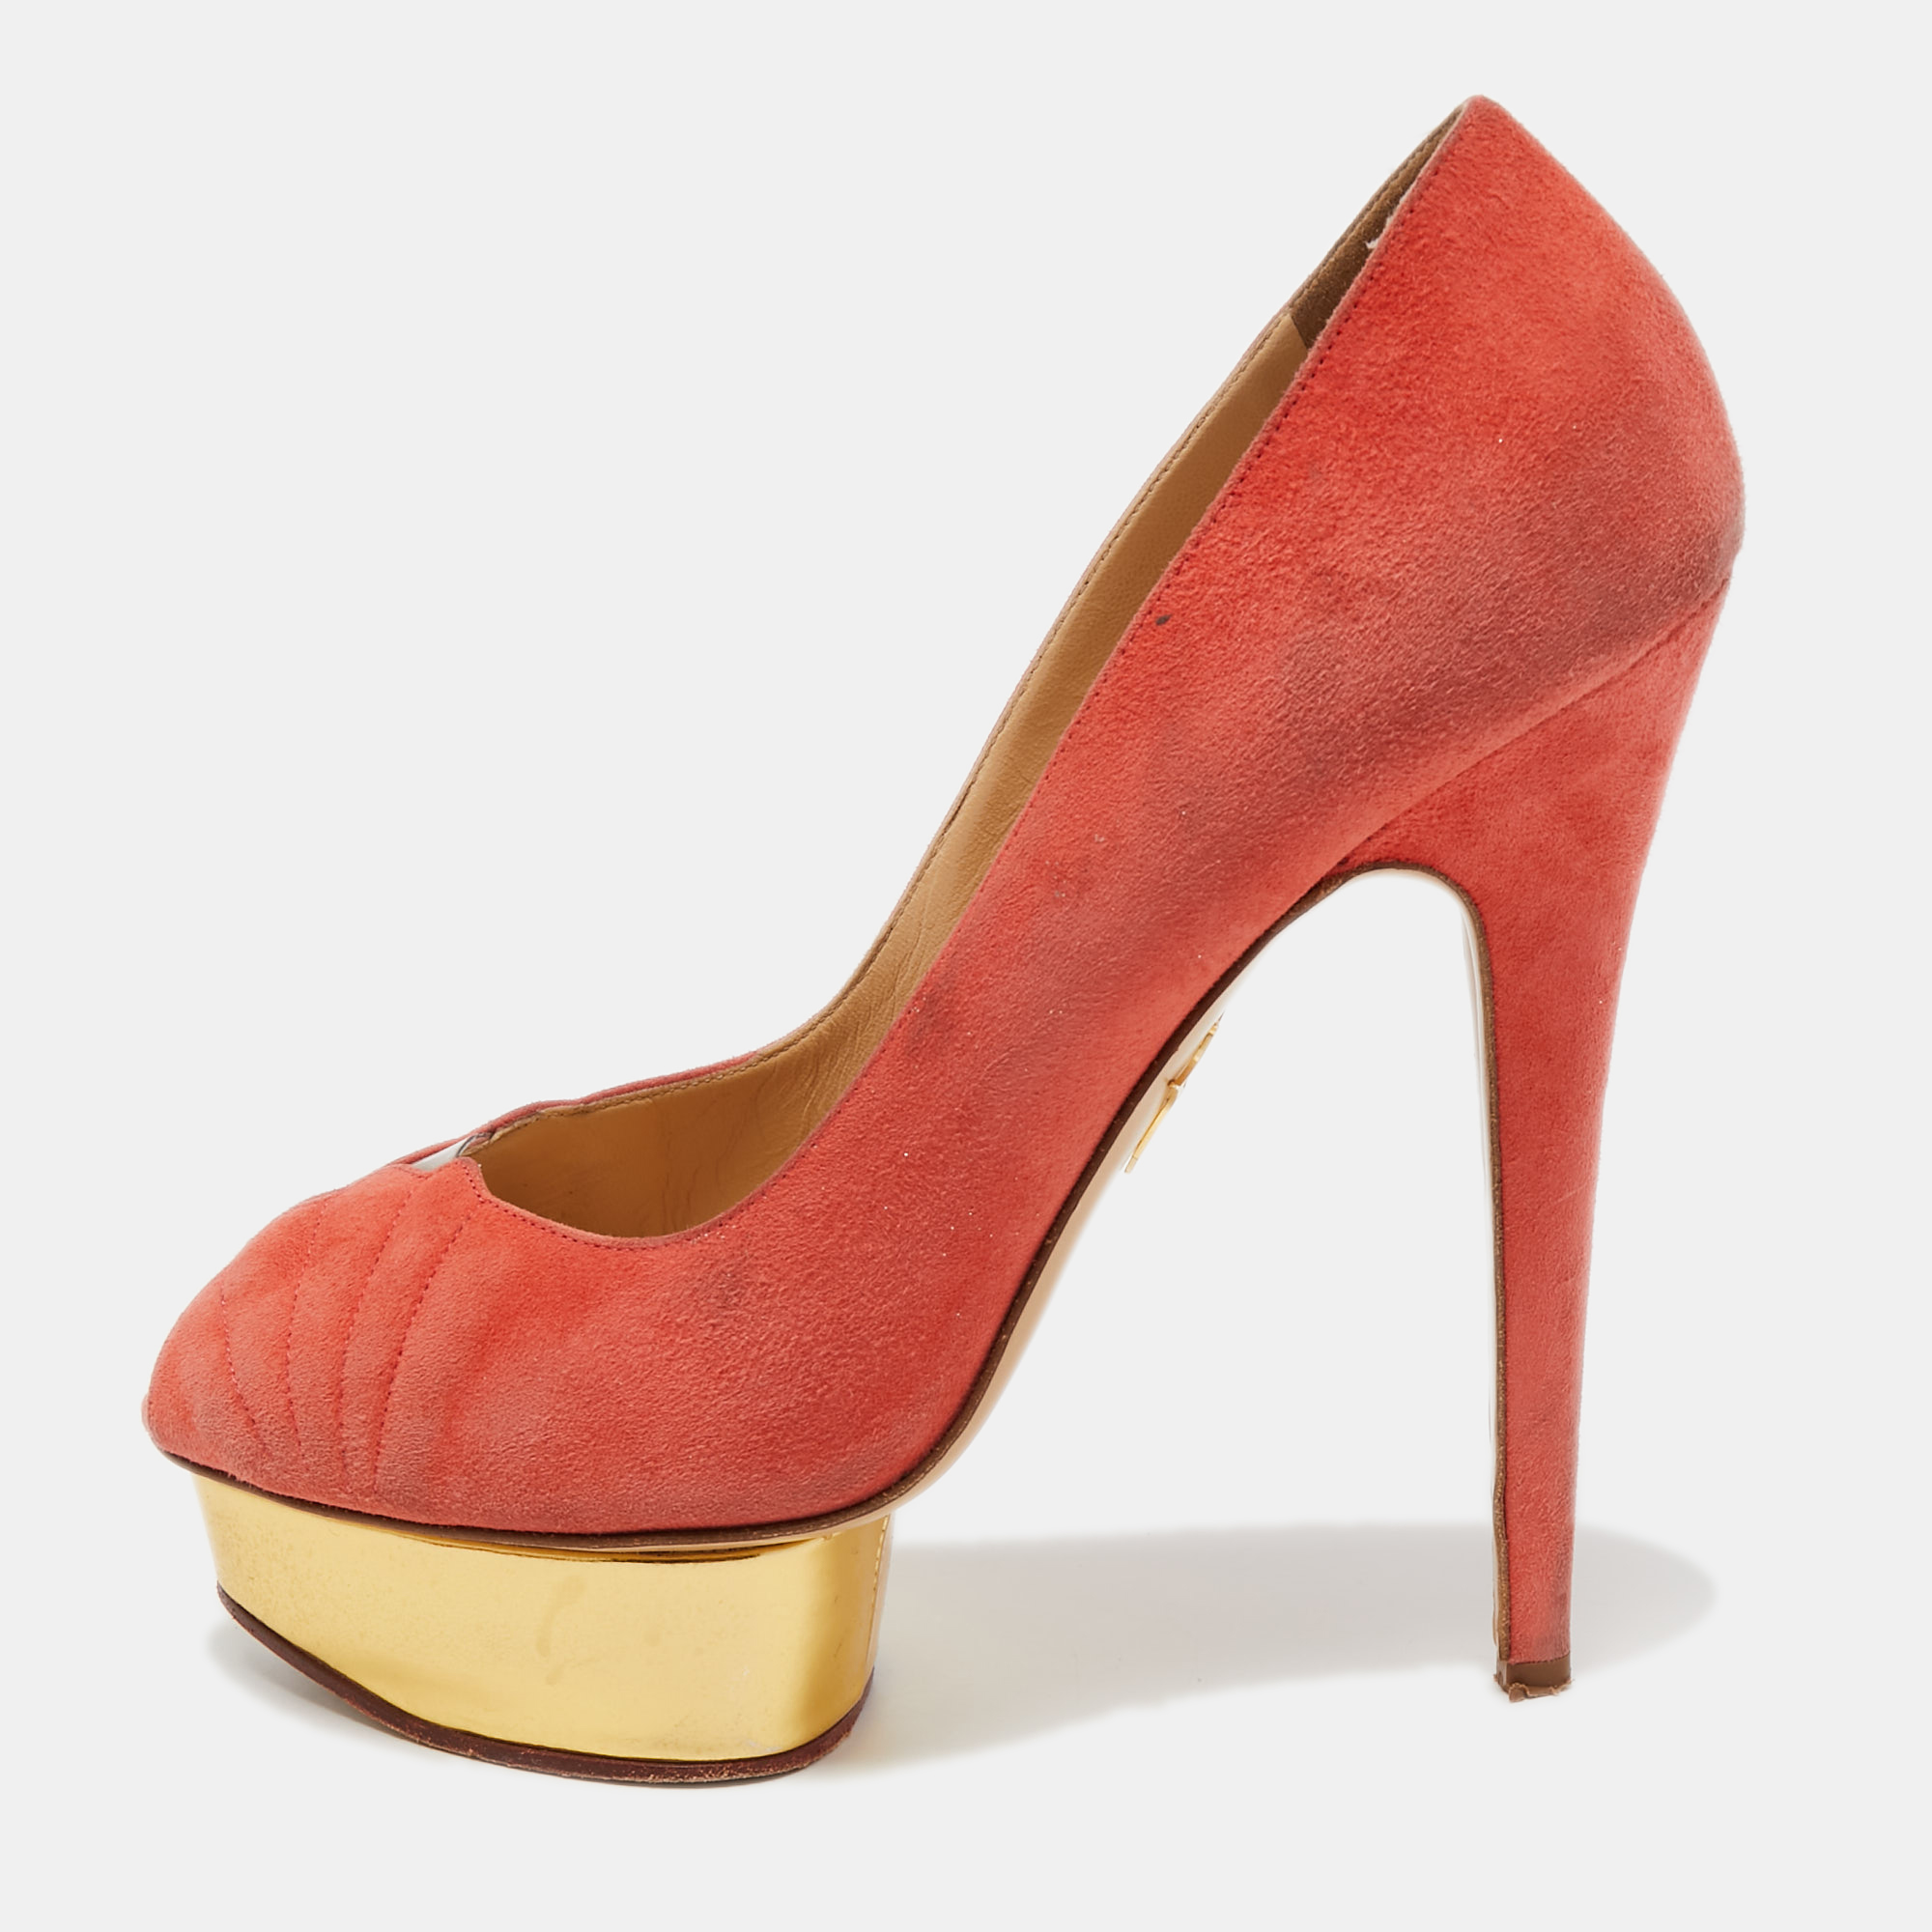 Charlotte olympia coral pink suede peep toe platform pumps size 41